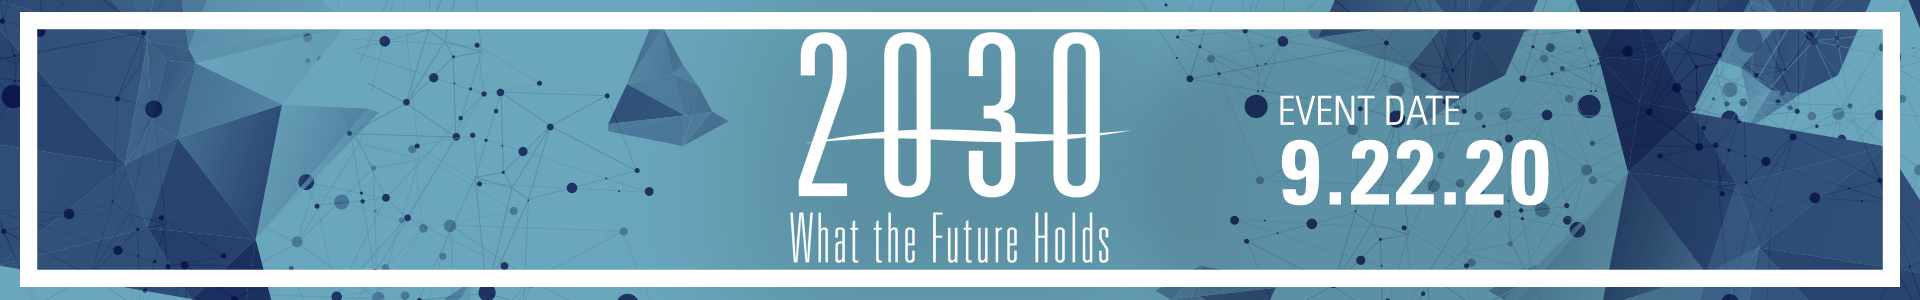 2030: What the Future Holds